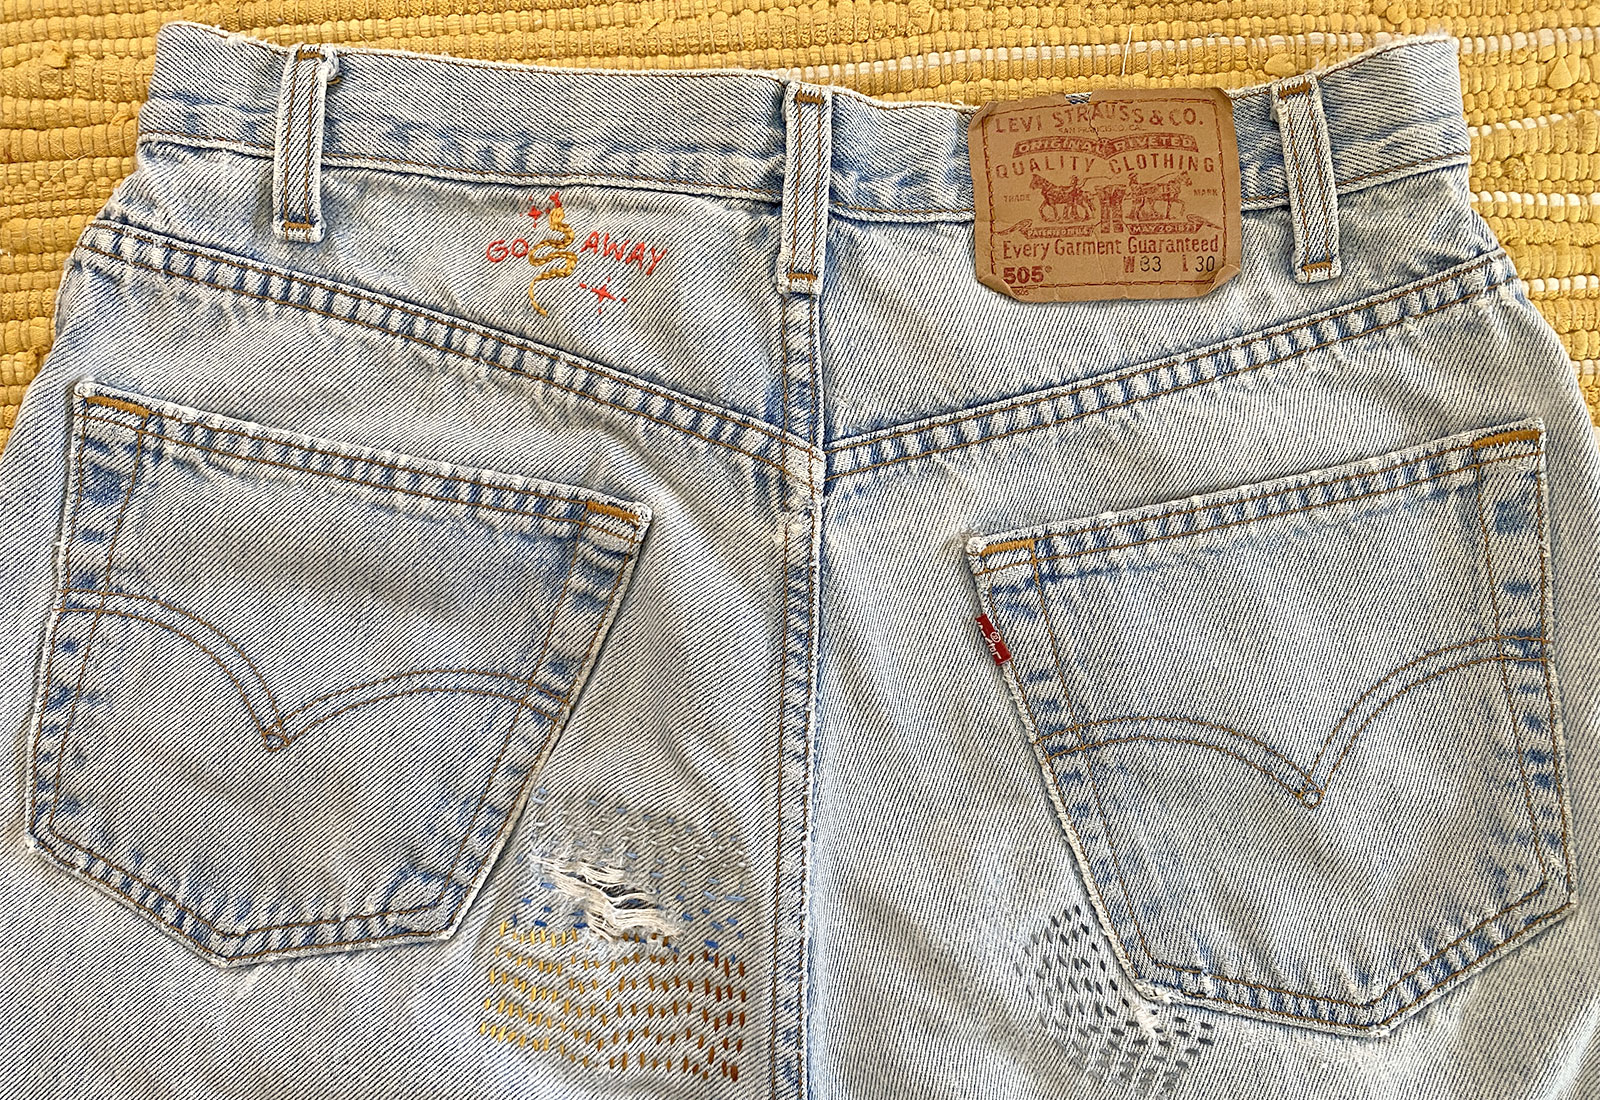 Back view of mended jeans with various running stitches on yellow rug